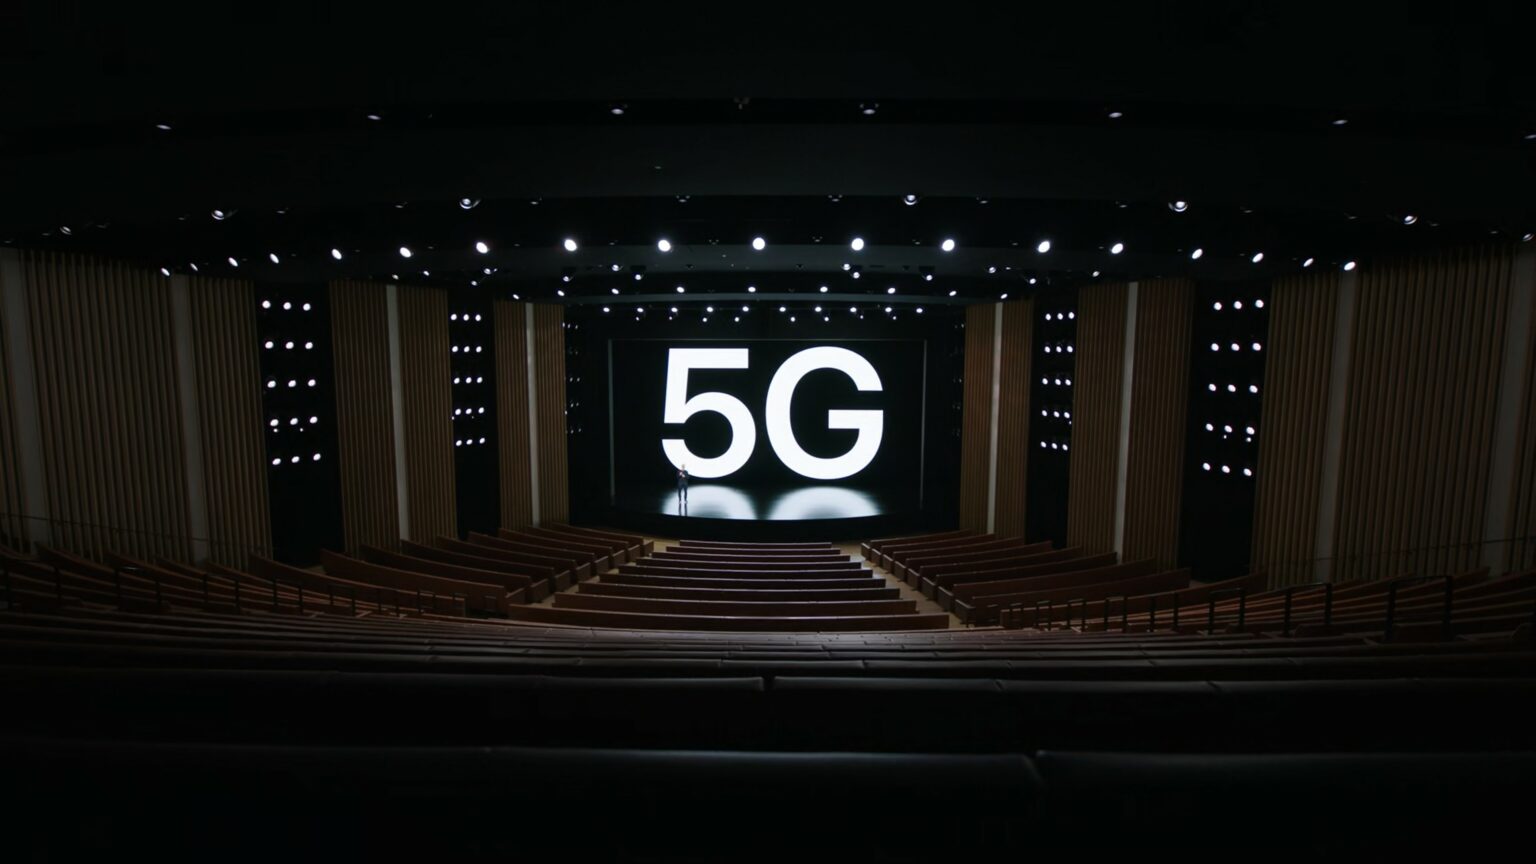 Apple isn't exactly subtle about pushing high-speed 5G networking. These 5G supercuts from the 